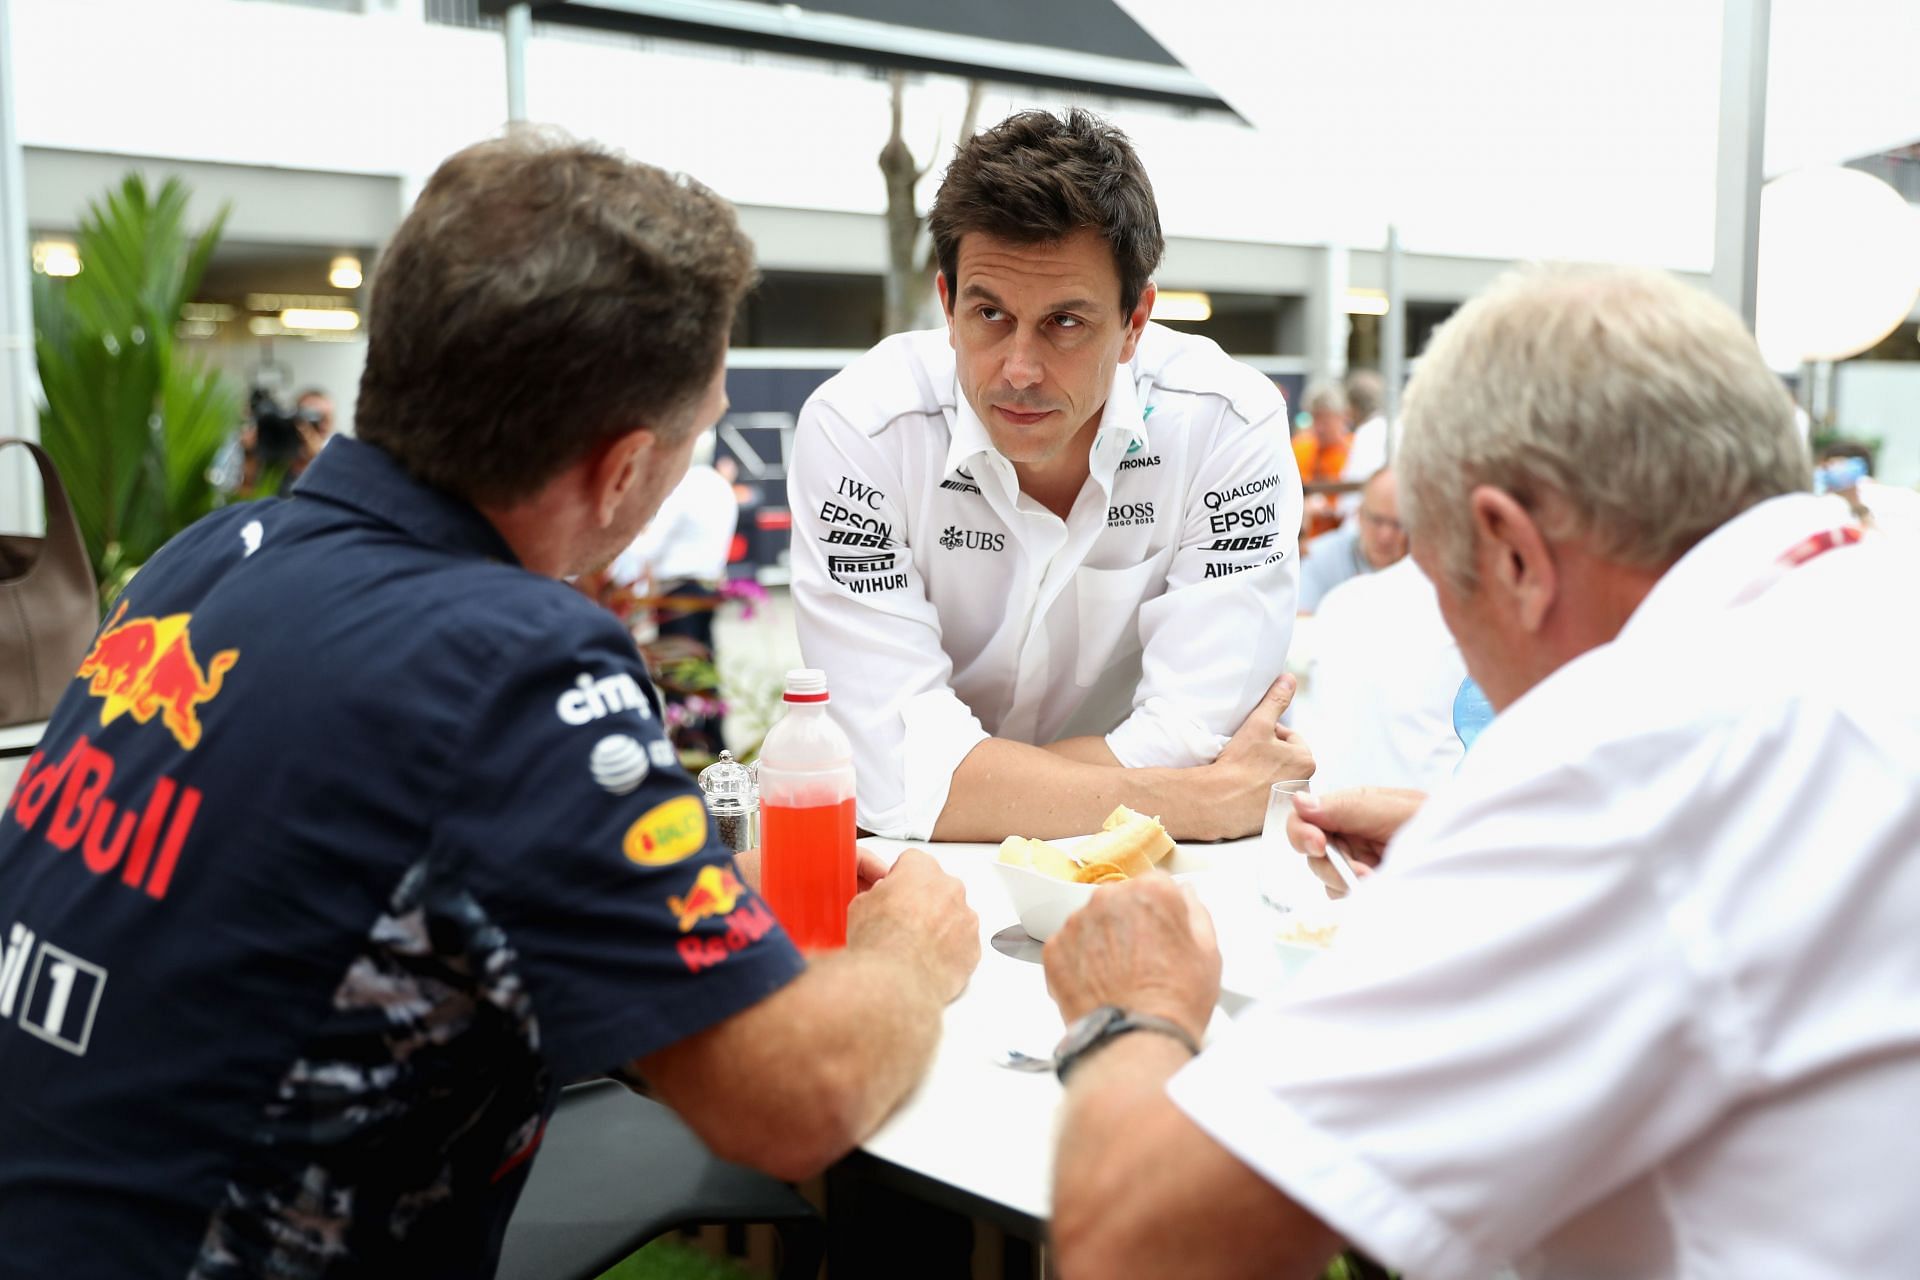 Toto Wolff (center) was engaged in heated exchanges with Red Bull team principal Christian Horner (left) and Speacial Adviser Helmut Marko (right) following the 2021 Abu Dhabi Grand Prix